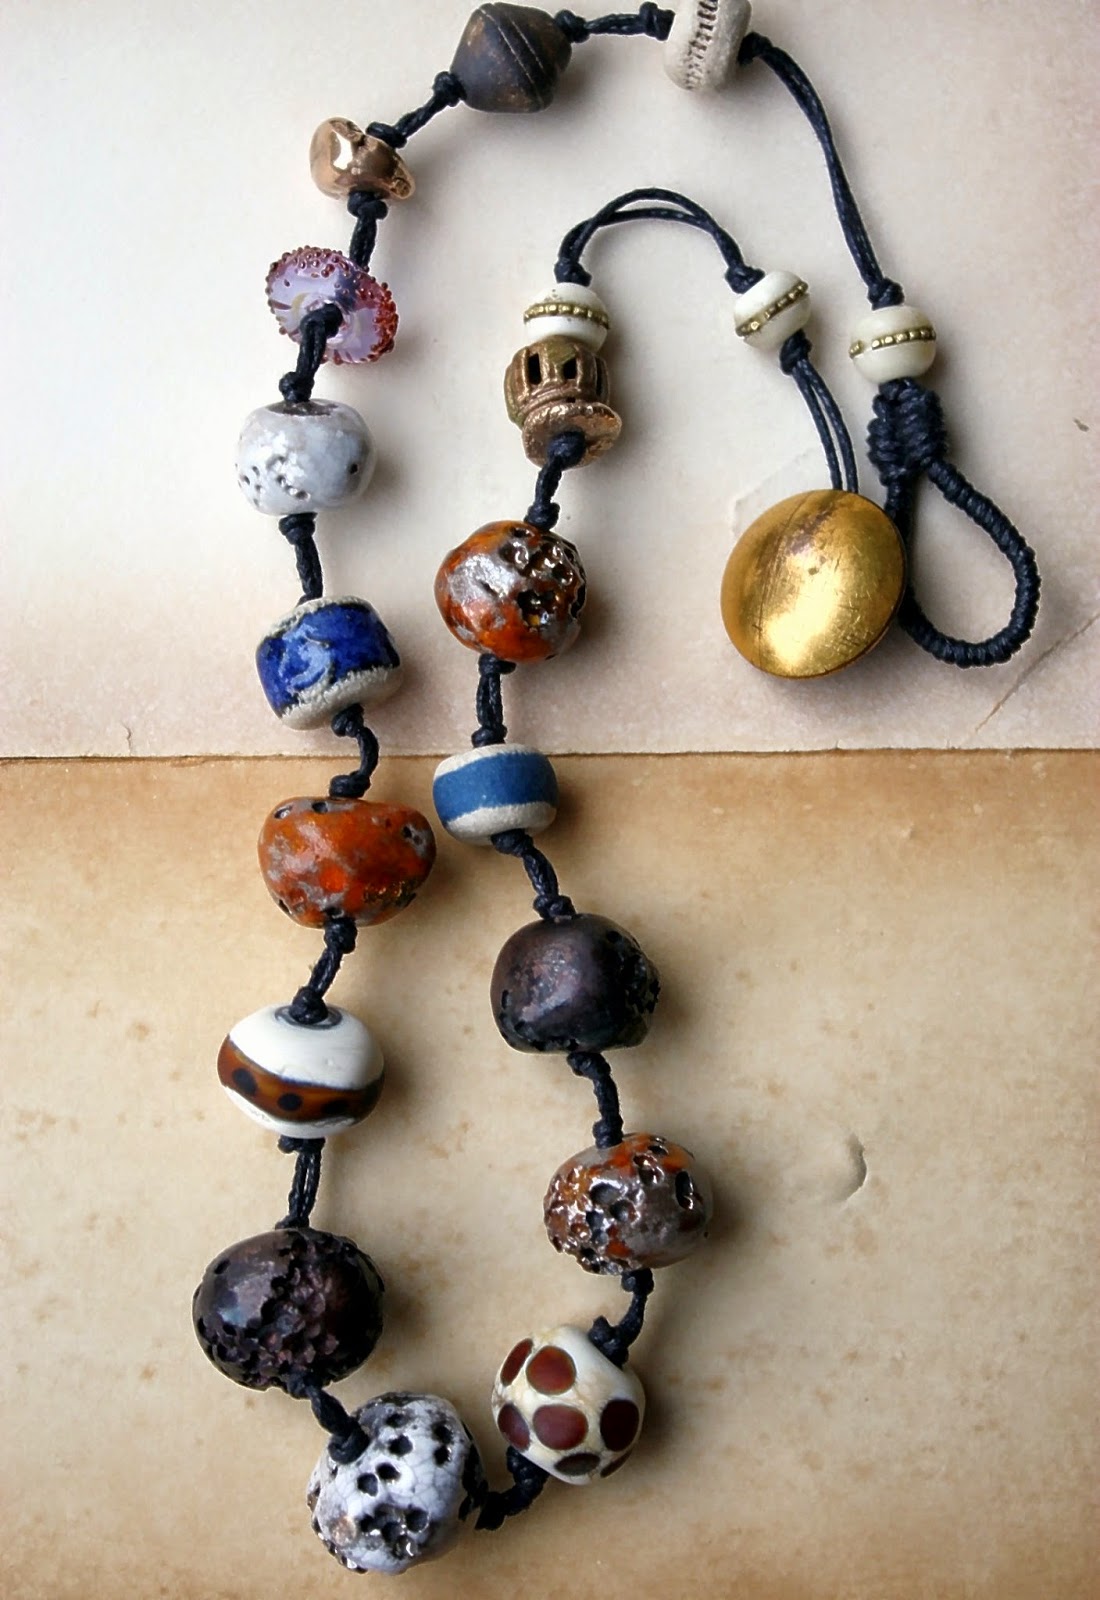 Art Bead Scene Blog: Interview with Dawn Dodson of La Touchables